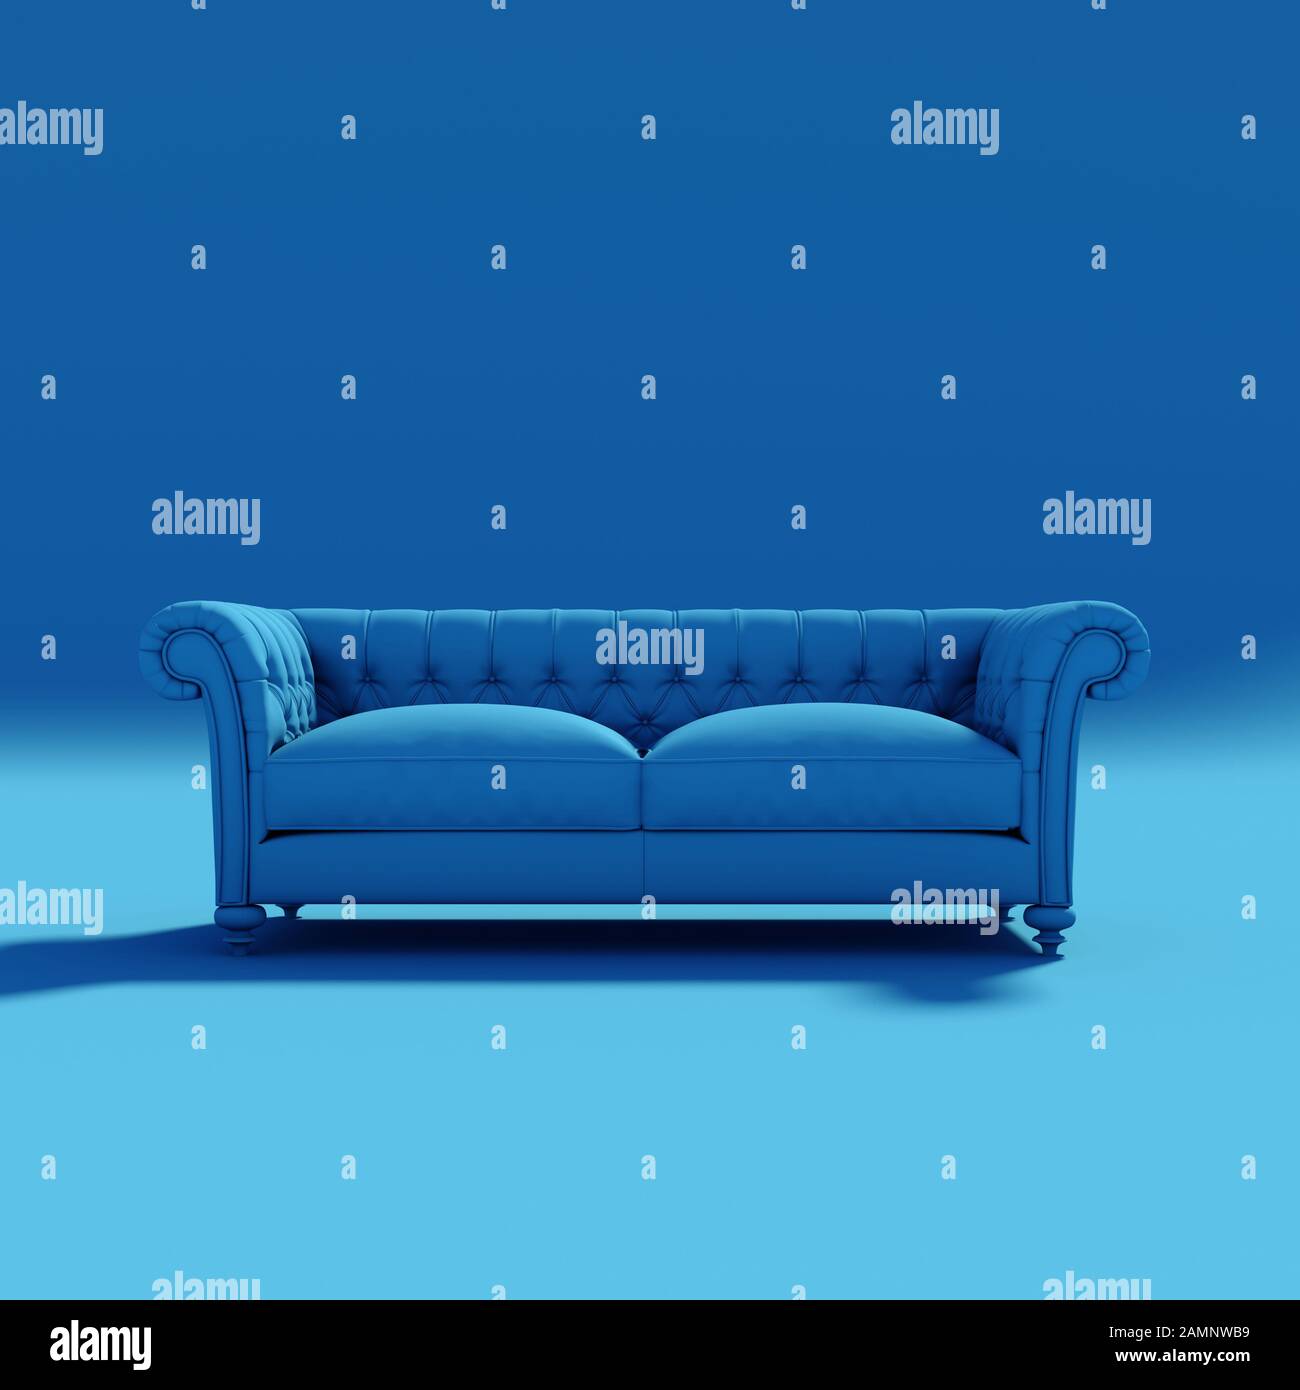 Classic sofa, nobody around. Horizontal image. Concept of design and modern style furniture. 3d render image. Pantone classic blue palette. Stock Photo